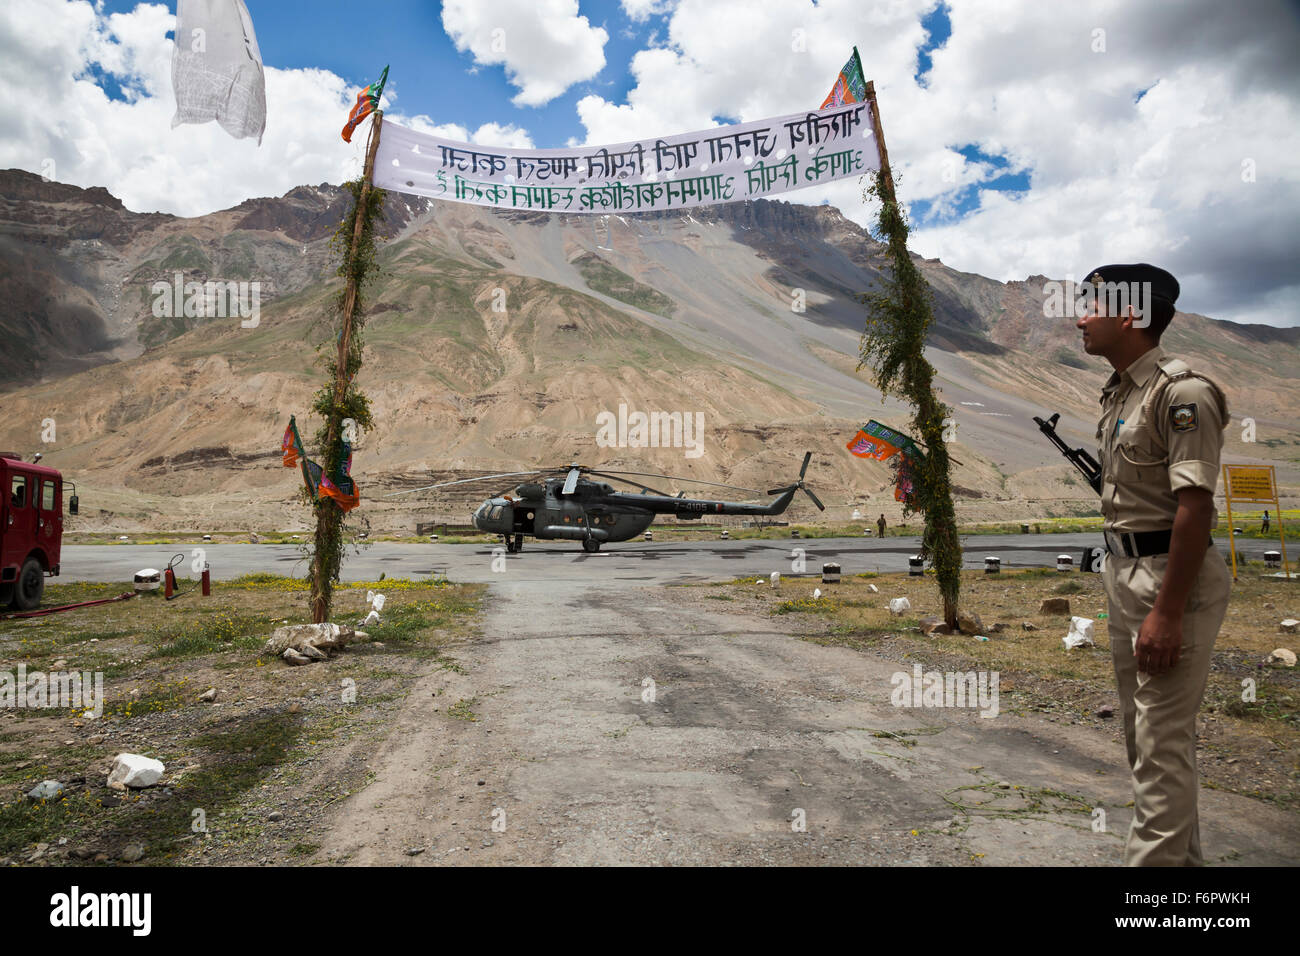 Soldier guards helicopter of the Indian Border Security Force at Kaza in the Himalayan region of Himachal Pradesh, India Stock Photo